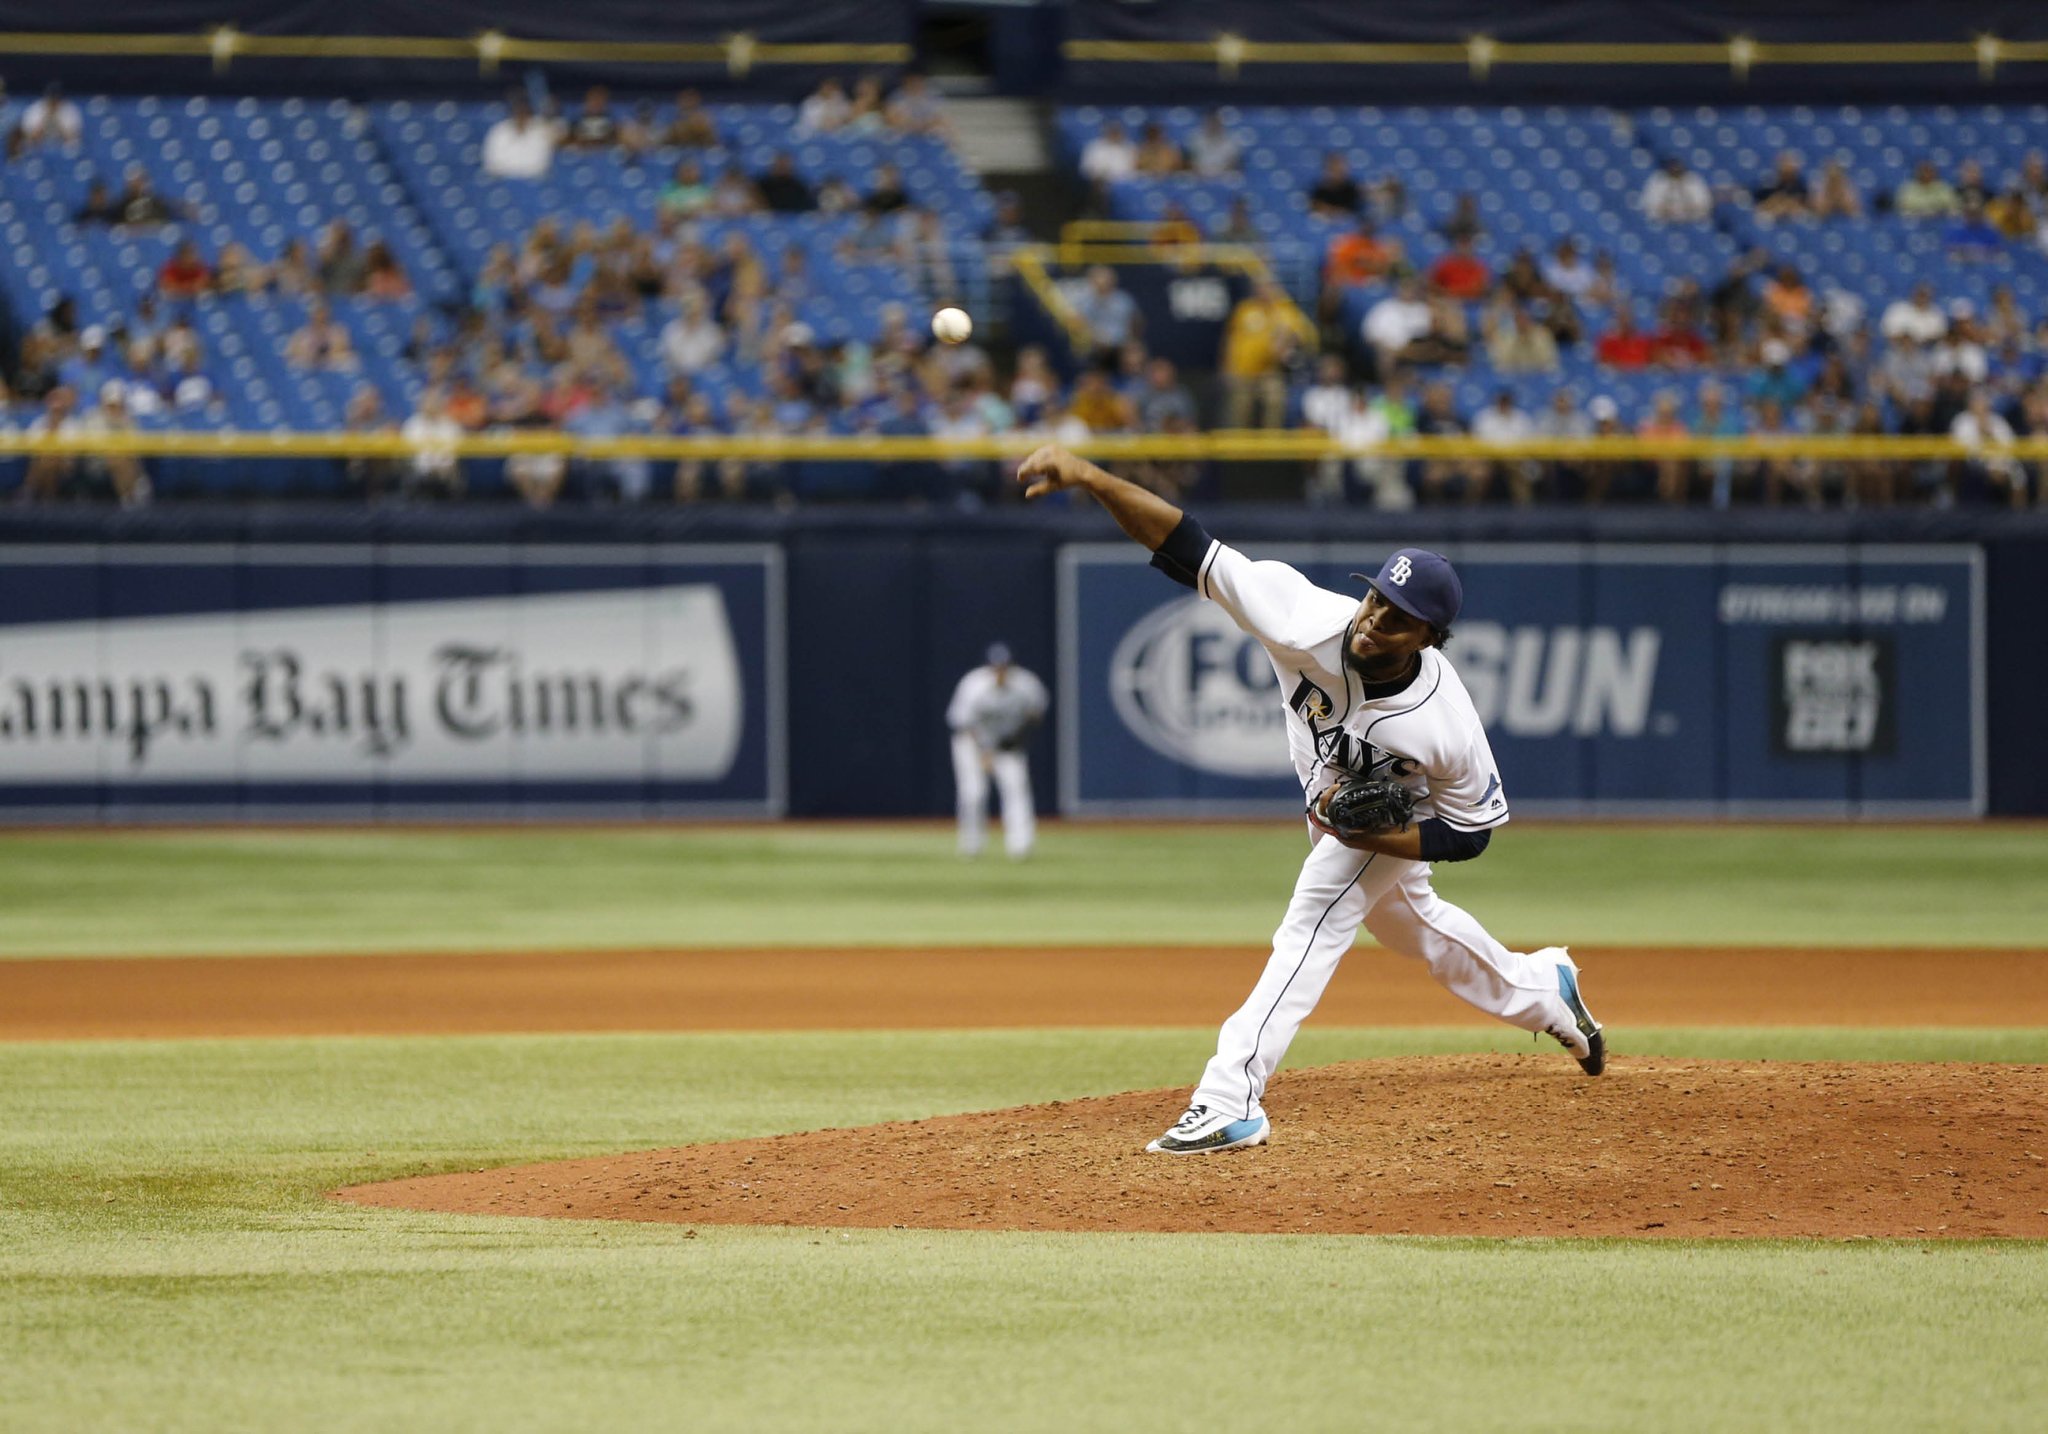 Alex Colome earned his 26th save of the season in the Tampa Bay Rays 3-2, come-from-behind win in the season finale against the Kansas City Royals on Thursday. (Photo Credit: Tampa Bay Rays)